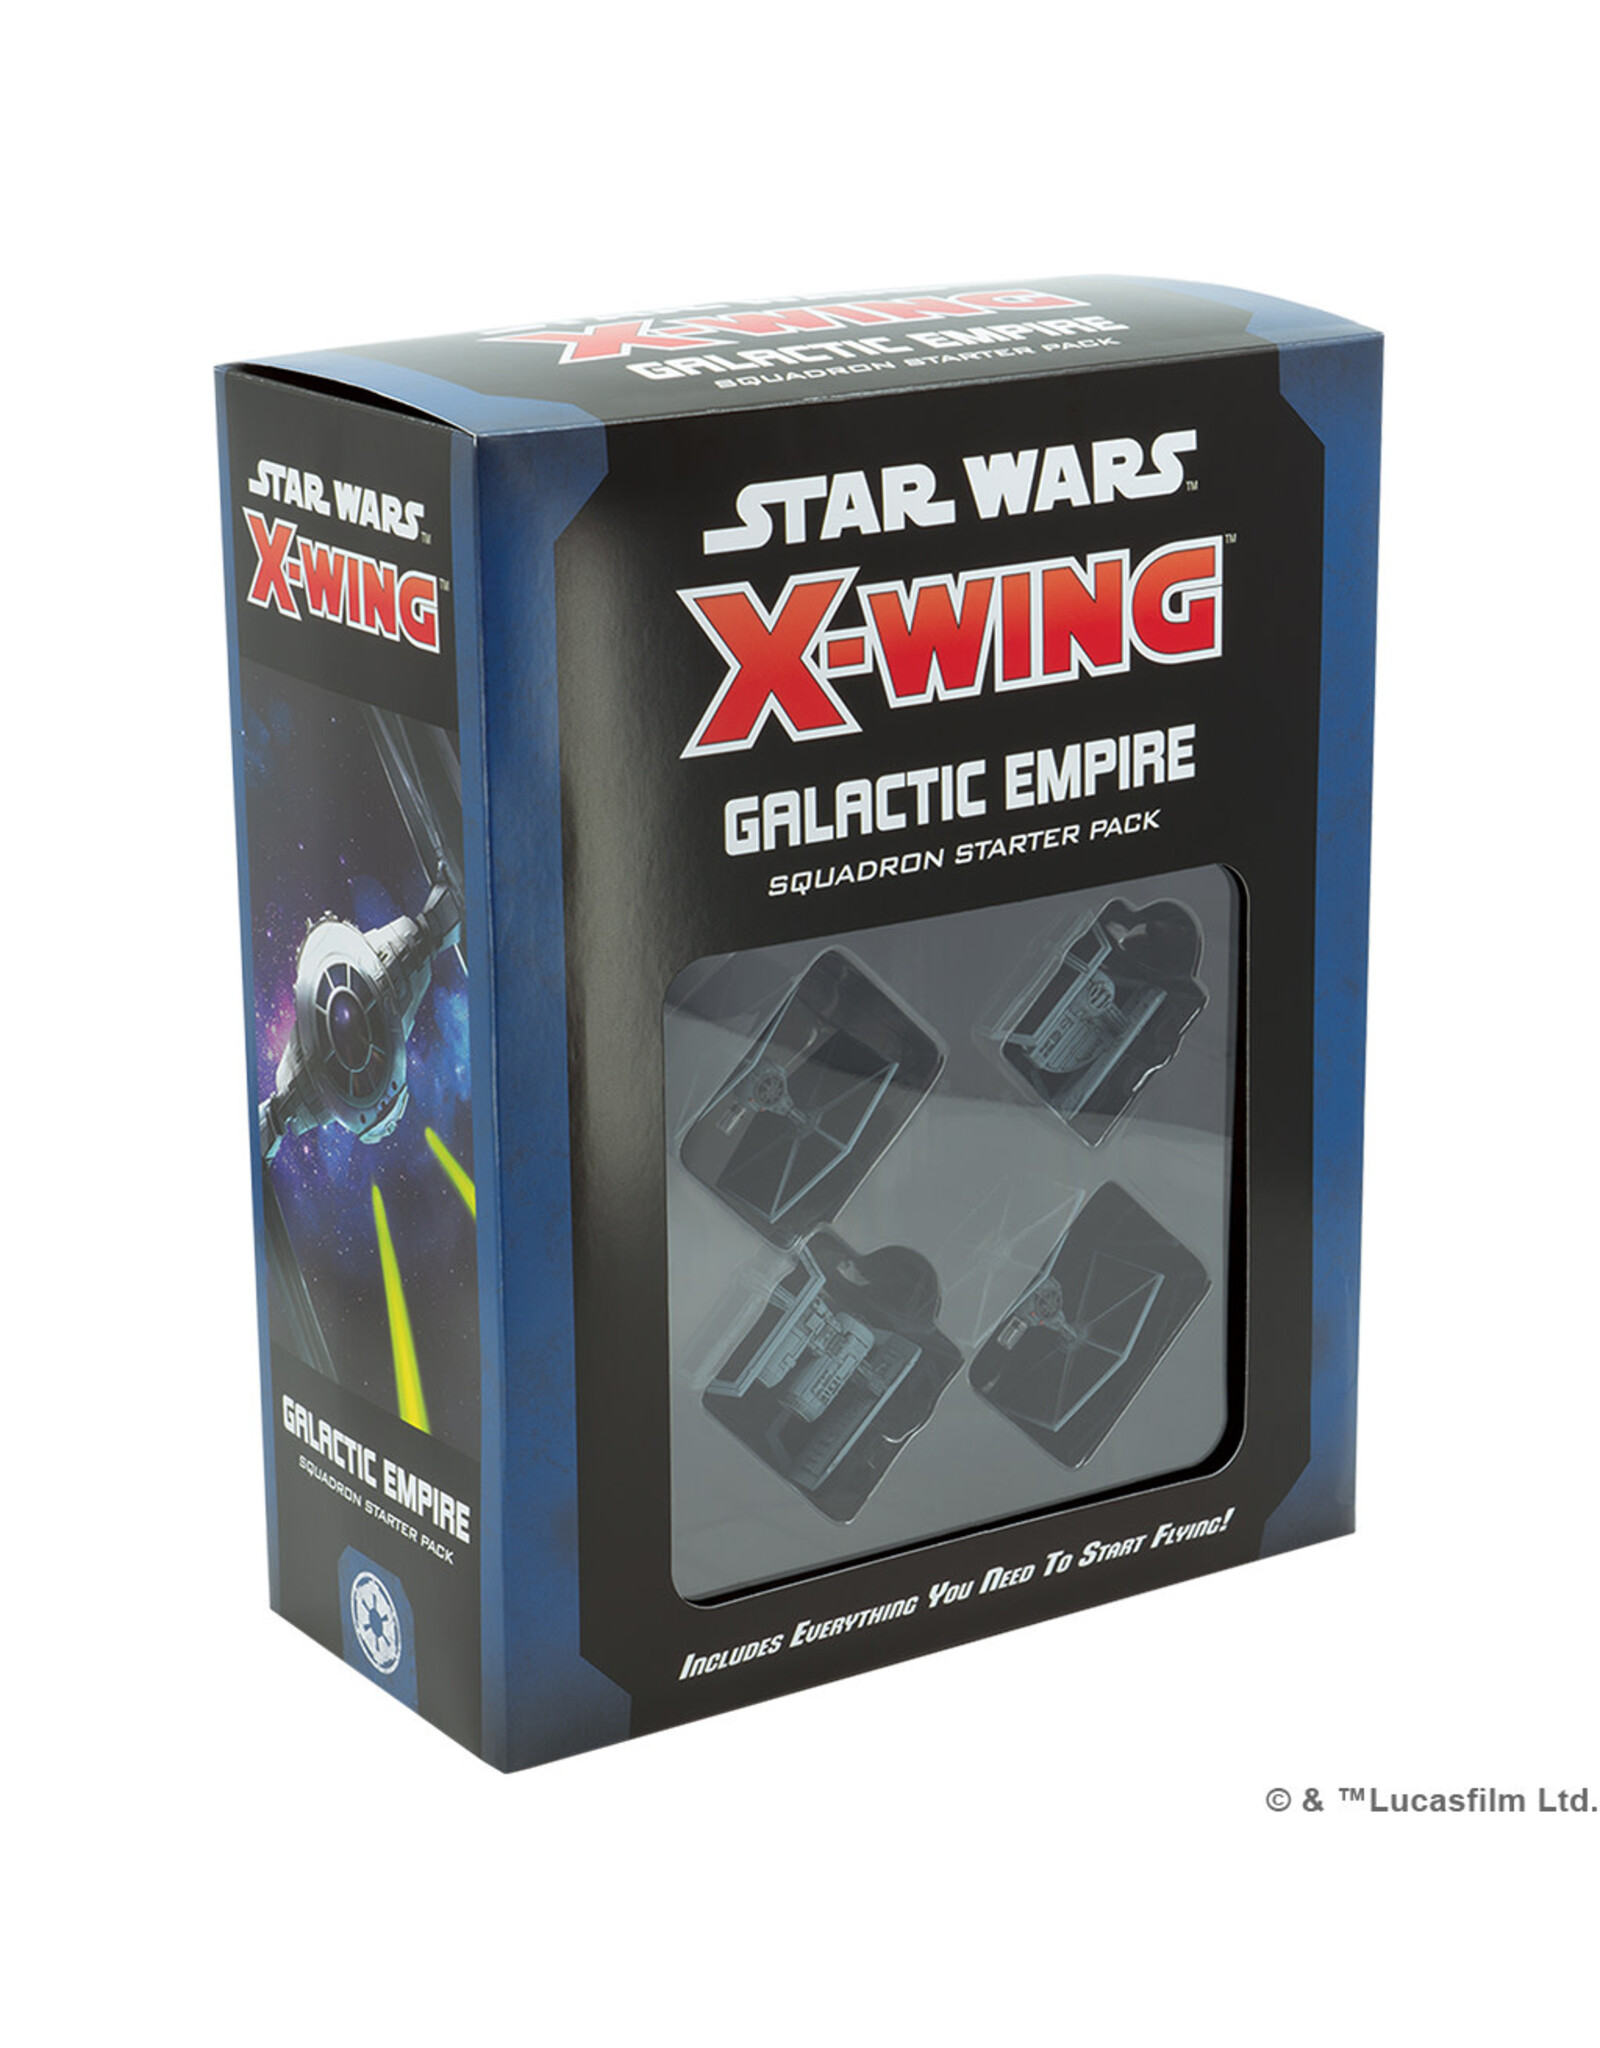 Star Wars X-Wing Galactic Empire Squadron Starter Pack